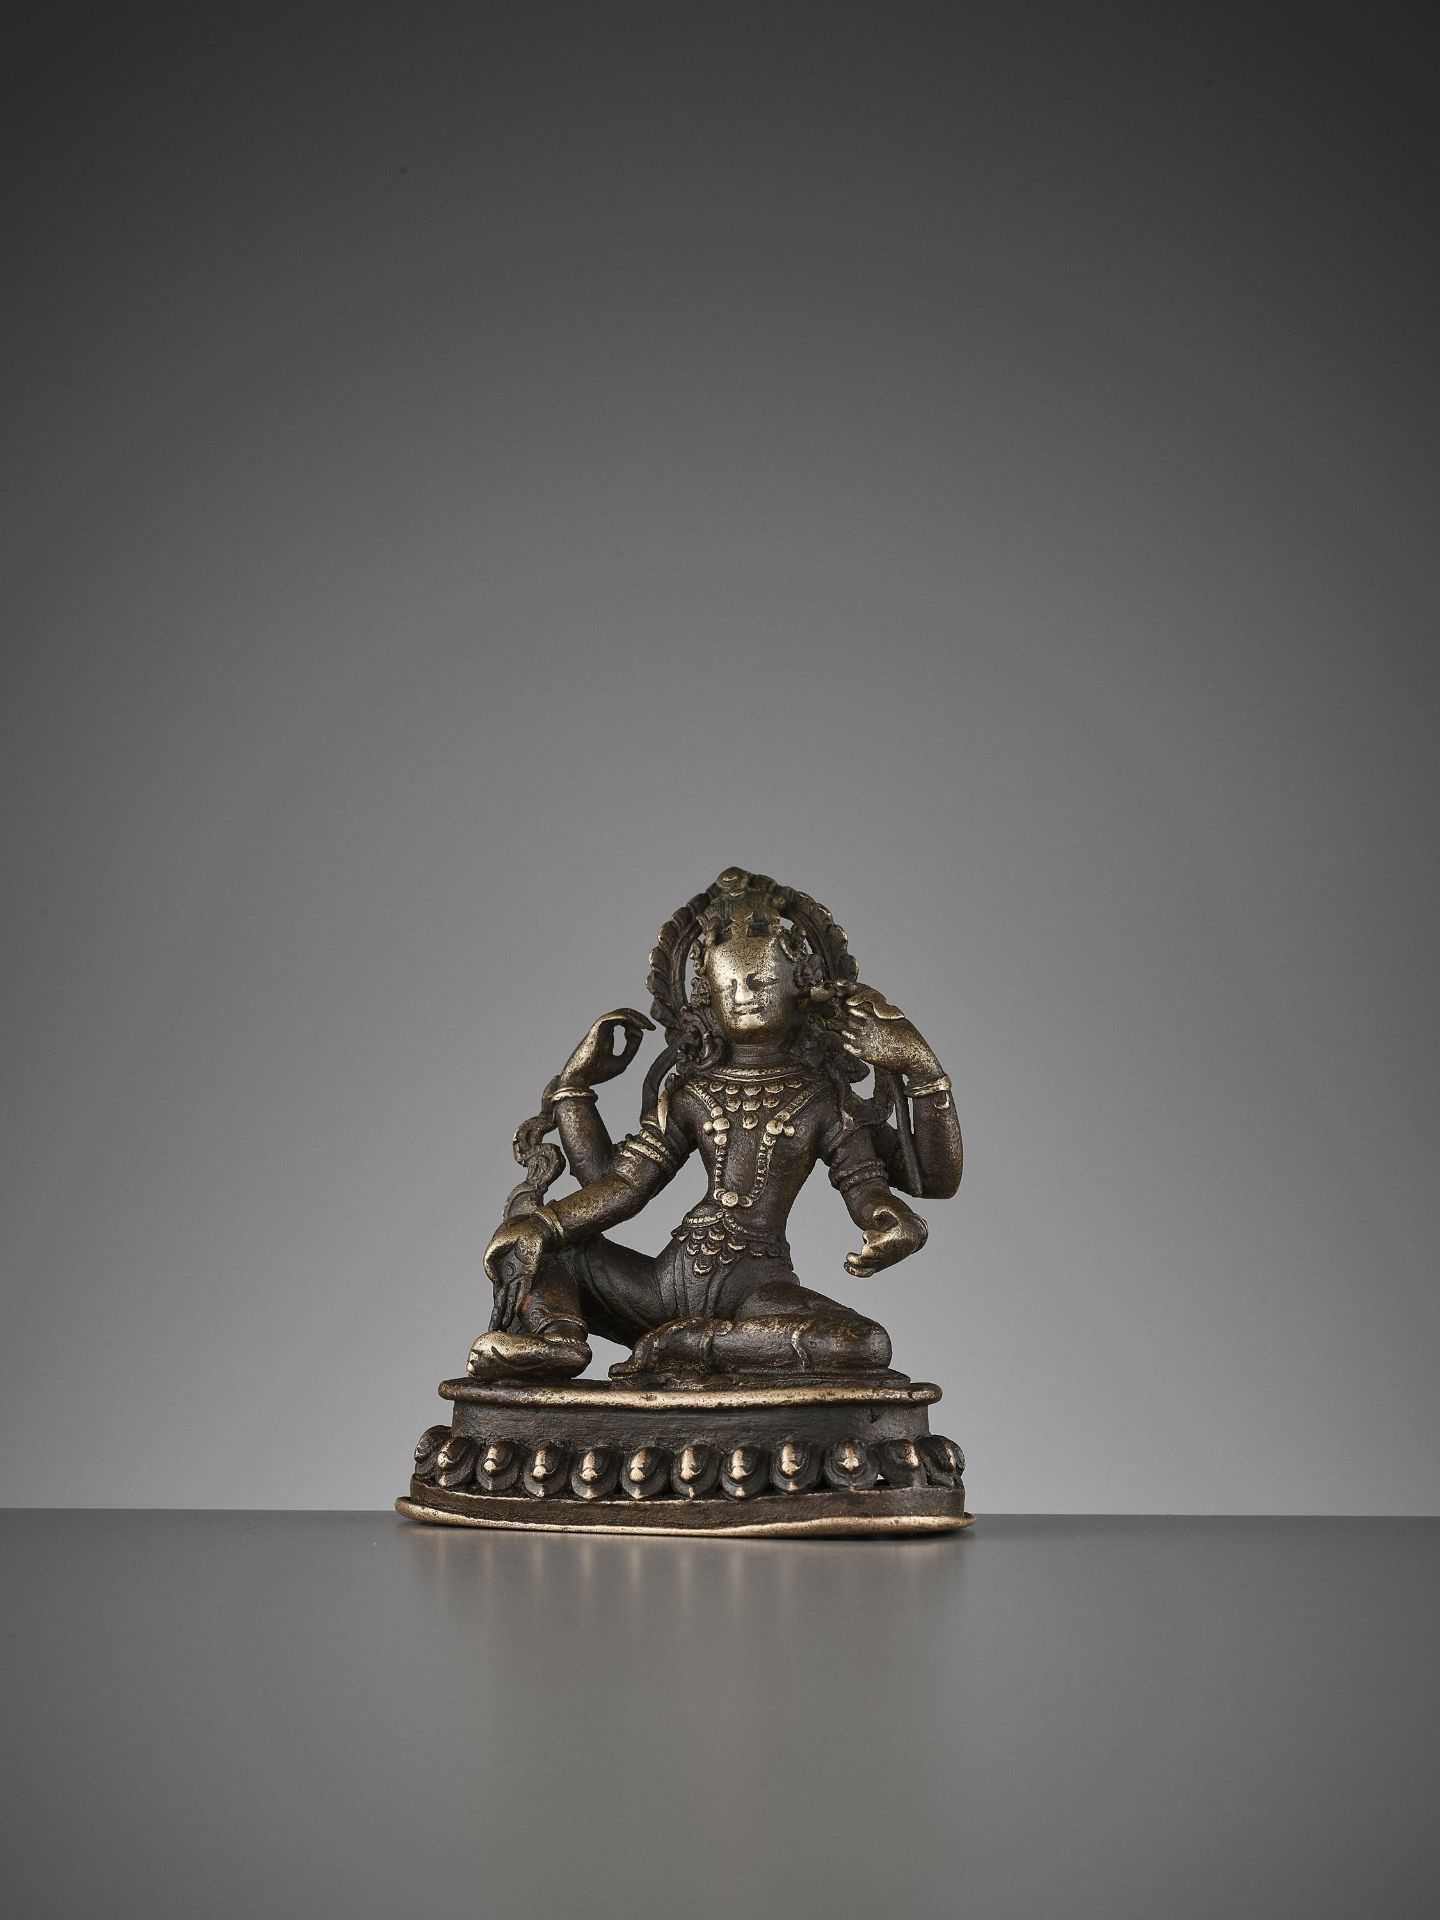 A SMALL BRONZE OF THE FOUR-ARMED AVALOKITESVARA, 15TH-16TH CENTURY - Image 2 of 11